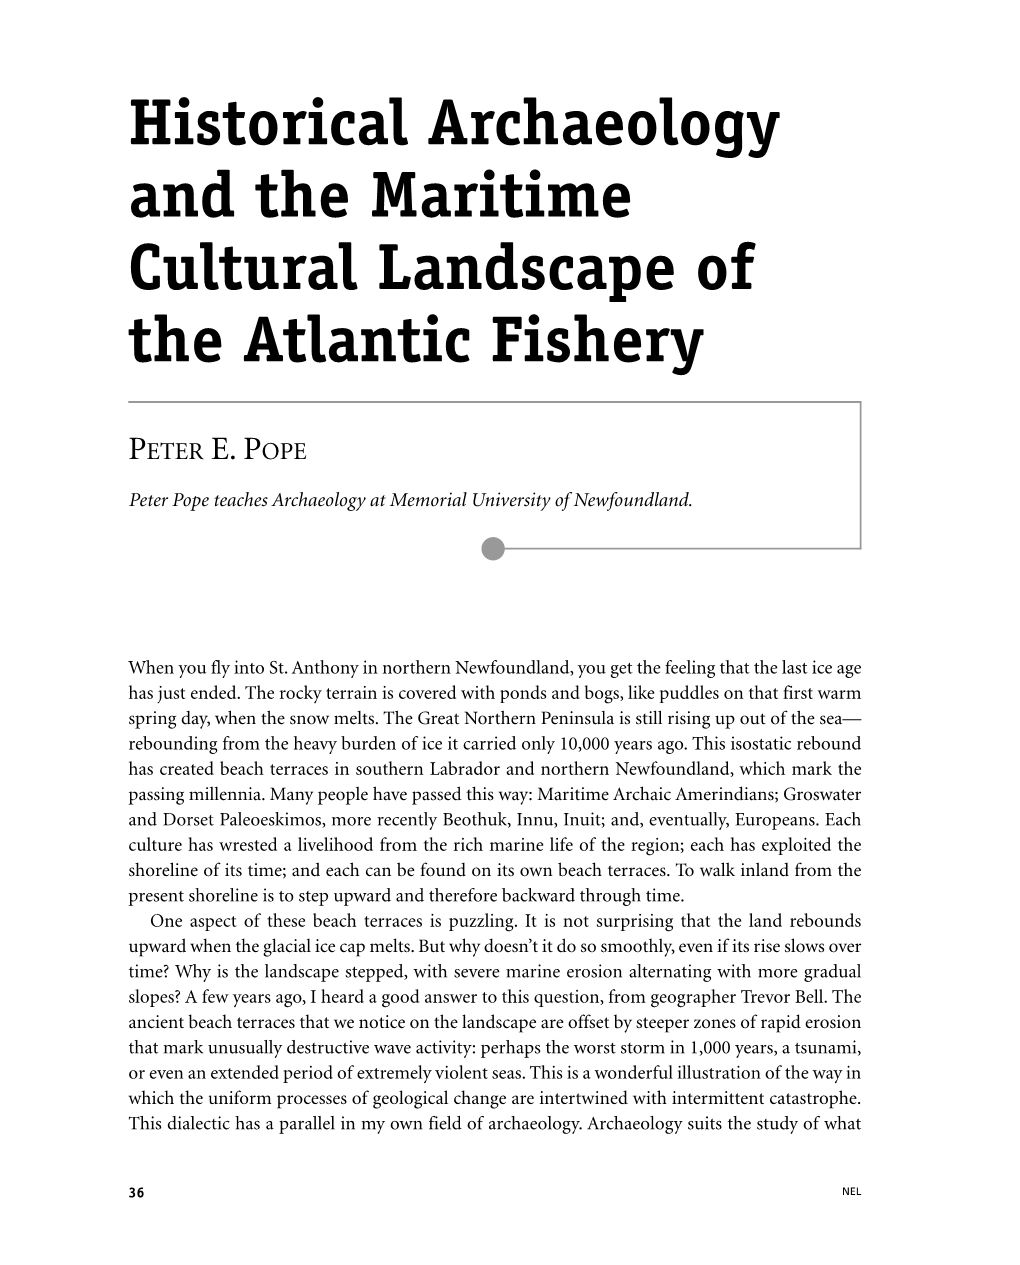 Historical Archaeology and the Maritime Cultural Landscape of the Atlantic Fishery